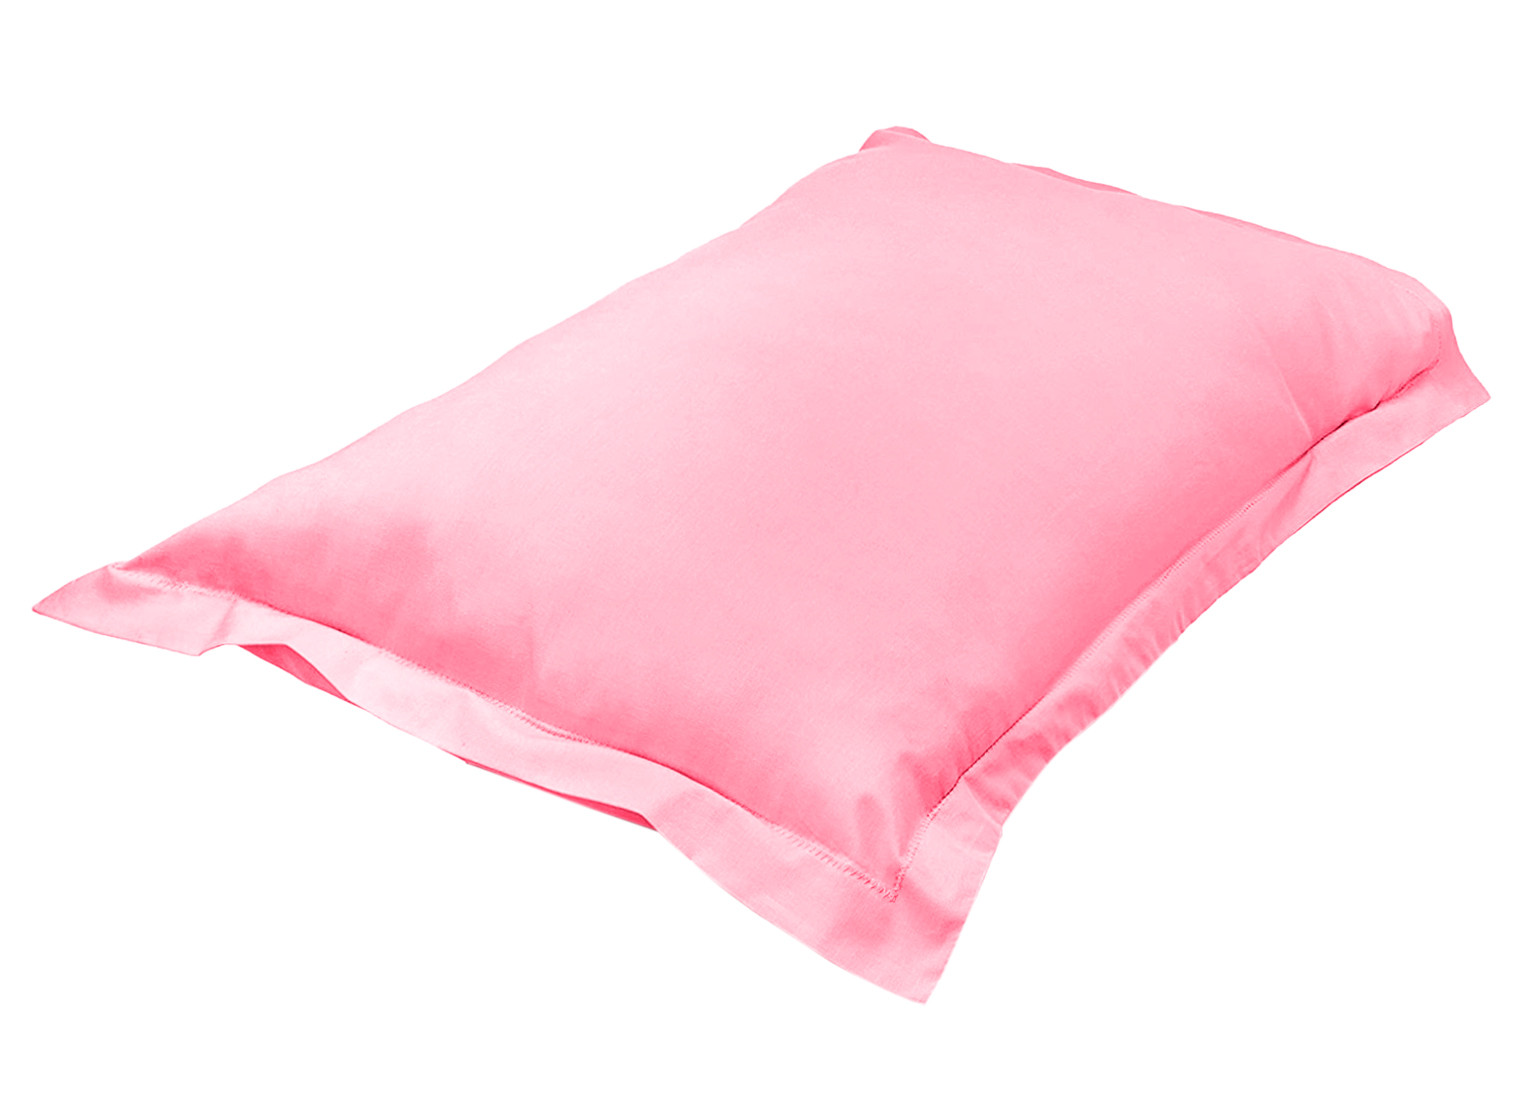 Kuber Industries Breathable & Soft Cotton Pillow Cover For Sofa, Couch, Bed - 29x20 Inch,(Pink)